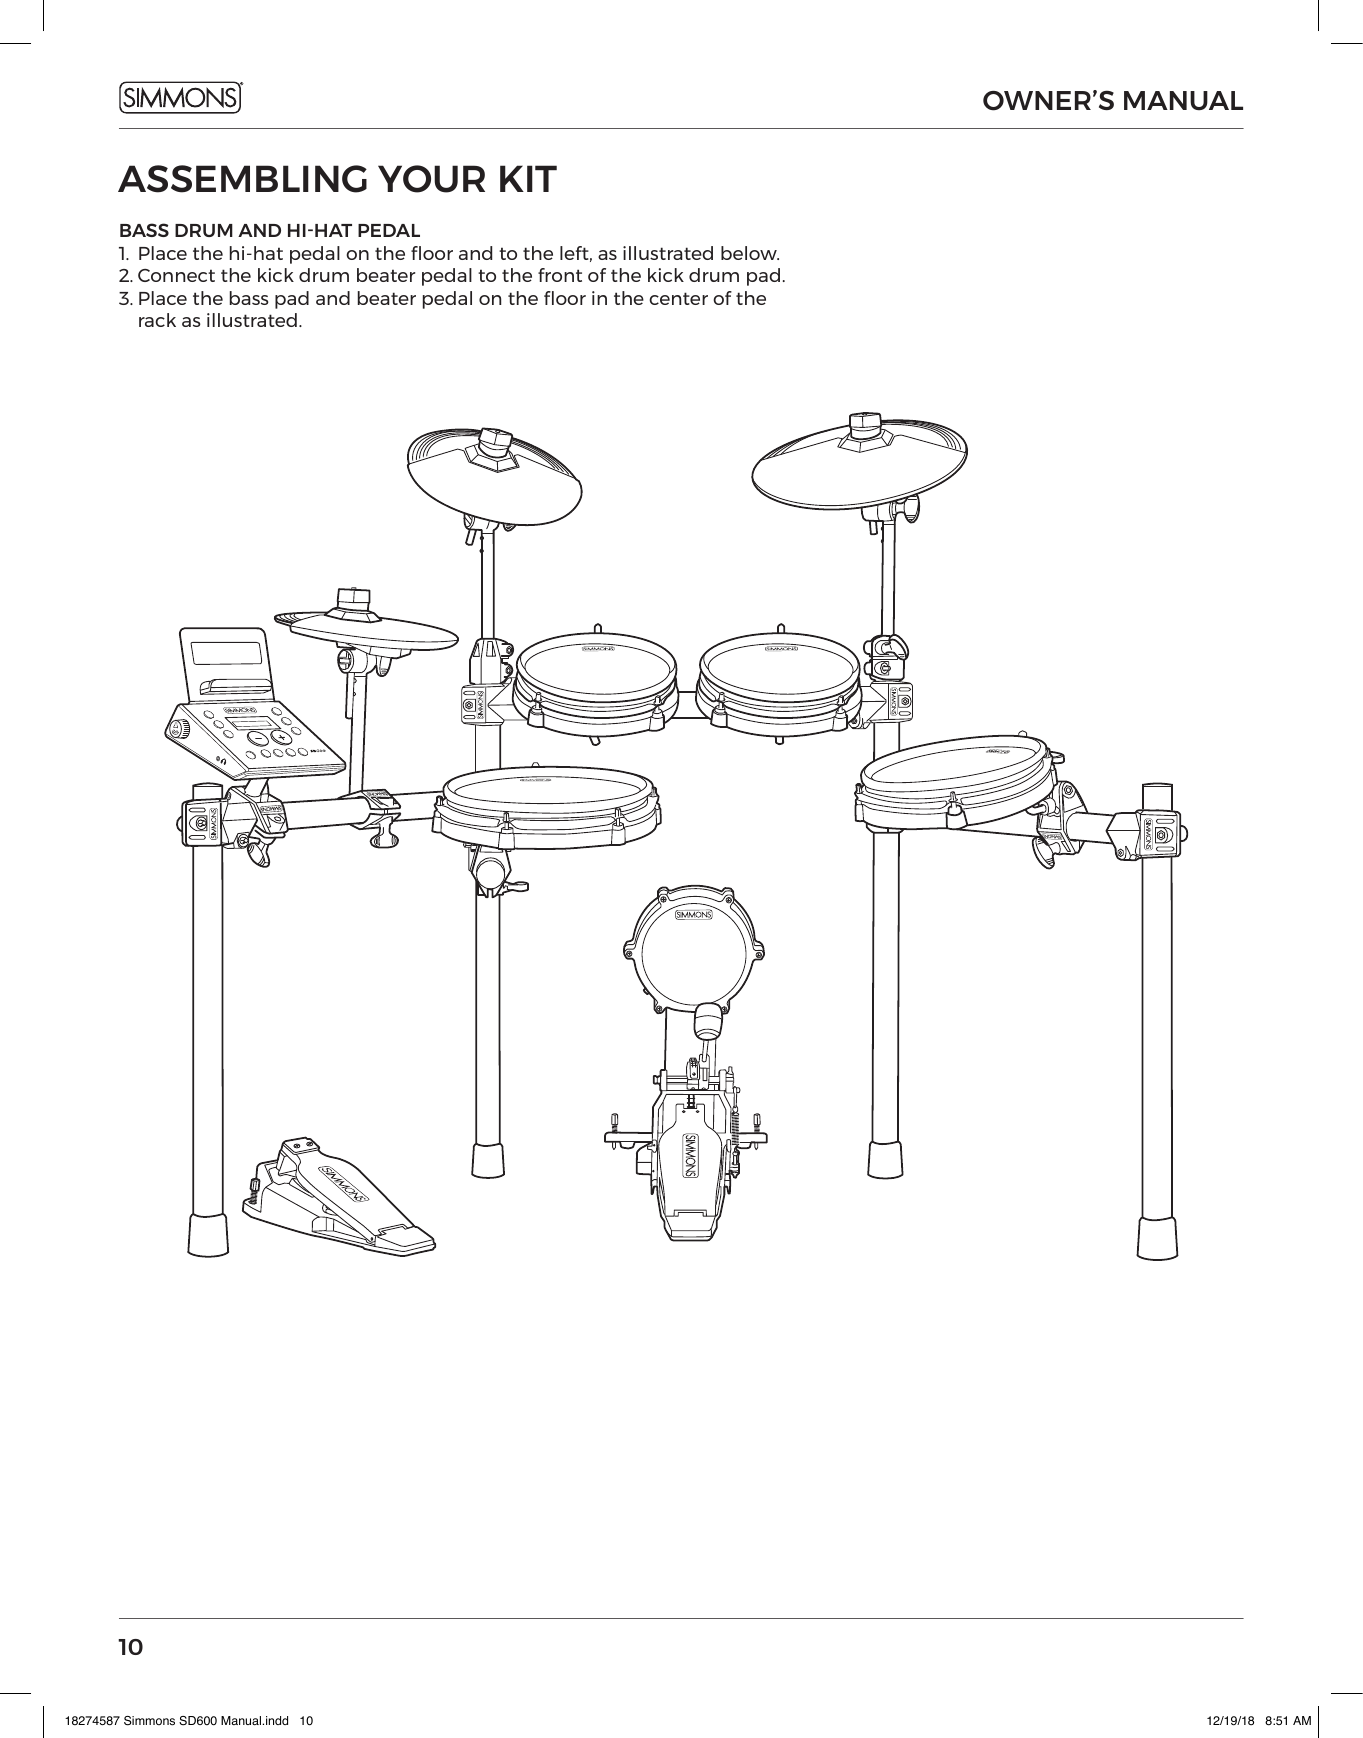 10OWNER’S MANUALASSEMBLING YOUR KITBASS DRUM AND HI-HAT PEDAL1.  Place the hi-hat pedal on the oor and to the left, as illustrated below.2. Connect the kick drum beater pedal to the front of the kick drum pad.3. Place the bass pad and beater pedal on the oor in the center of the rack as illustrated.18274587 Simmons SD600 Manual.indd   10 12/19/18   8:51 AM